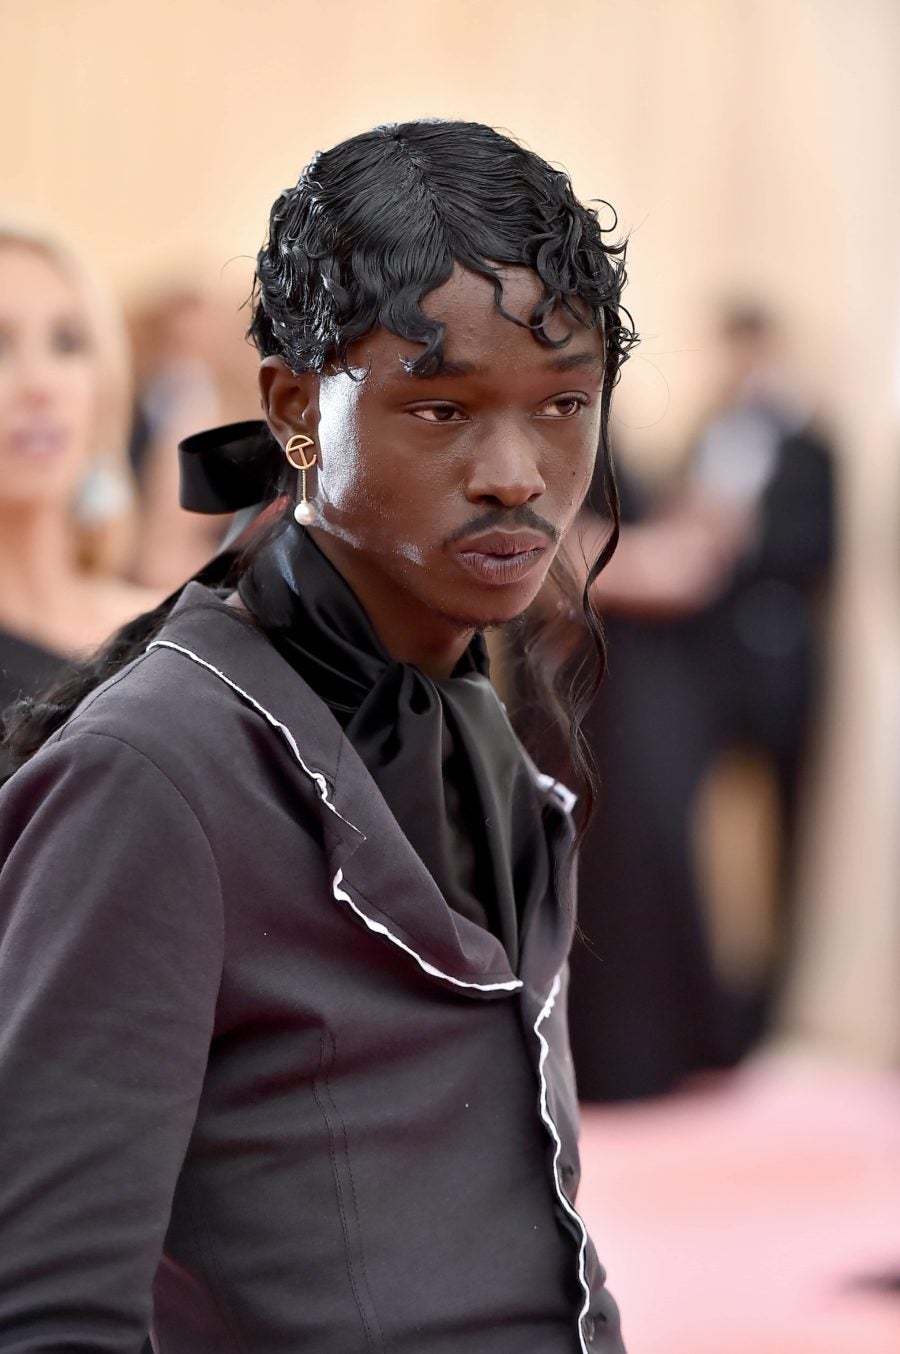 The Best Hair And Makeup Moments Of The 2019 Met Gala Arrivals | Essence